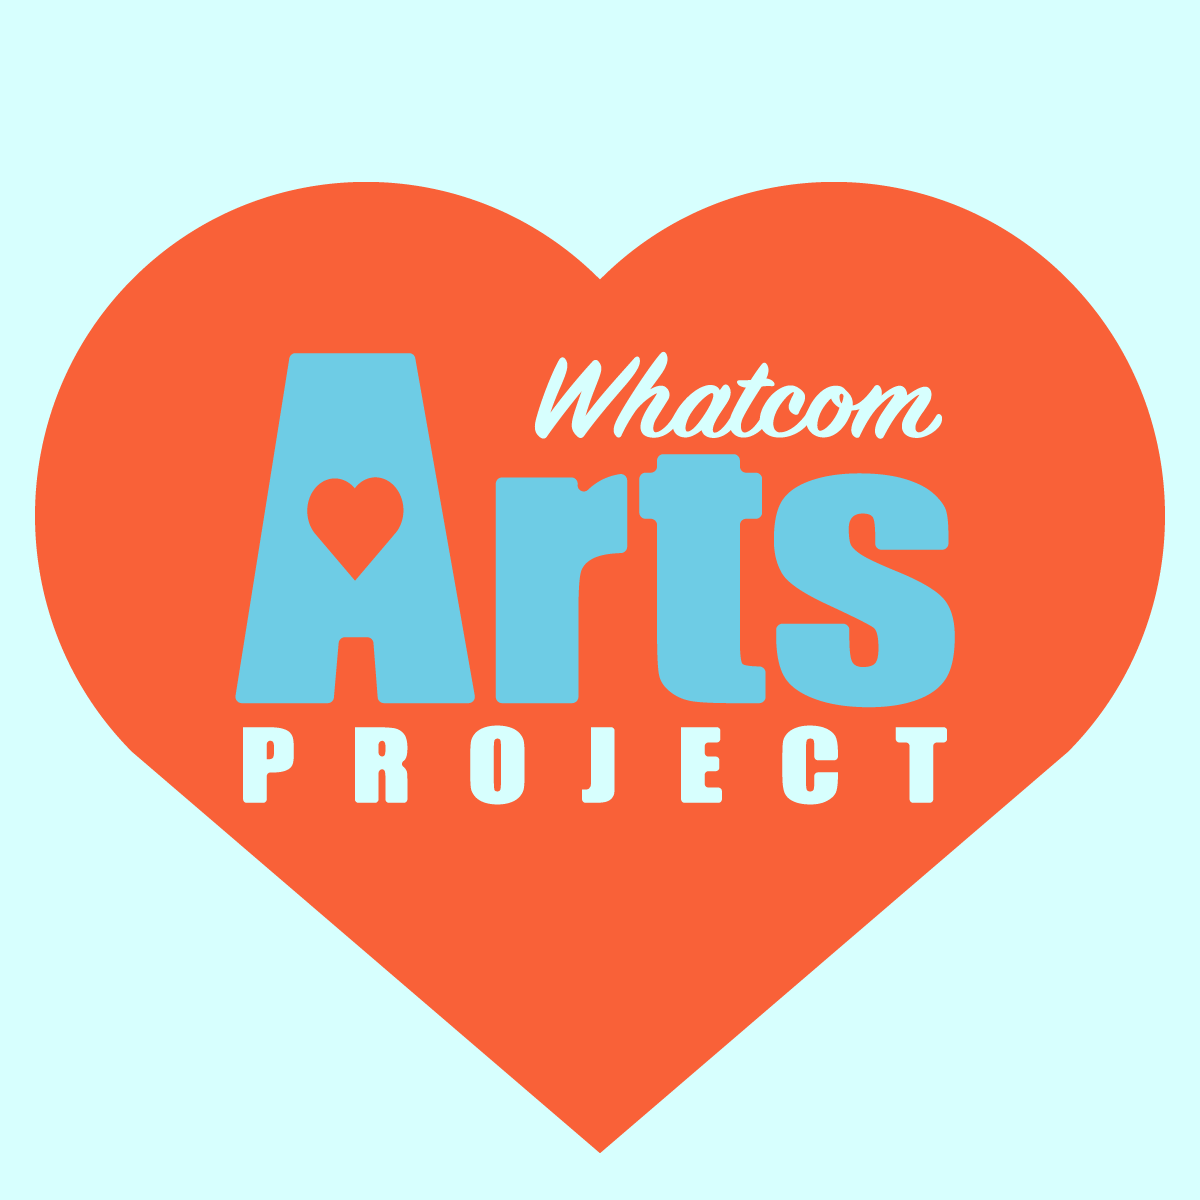 logo: The name Whatcom Arts Project positioned inside a heart